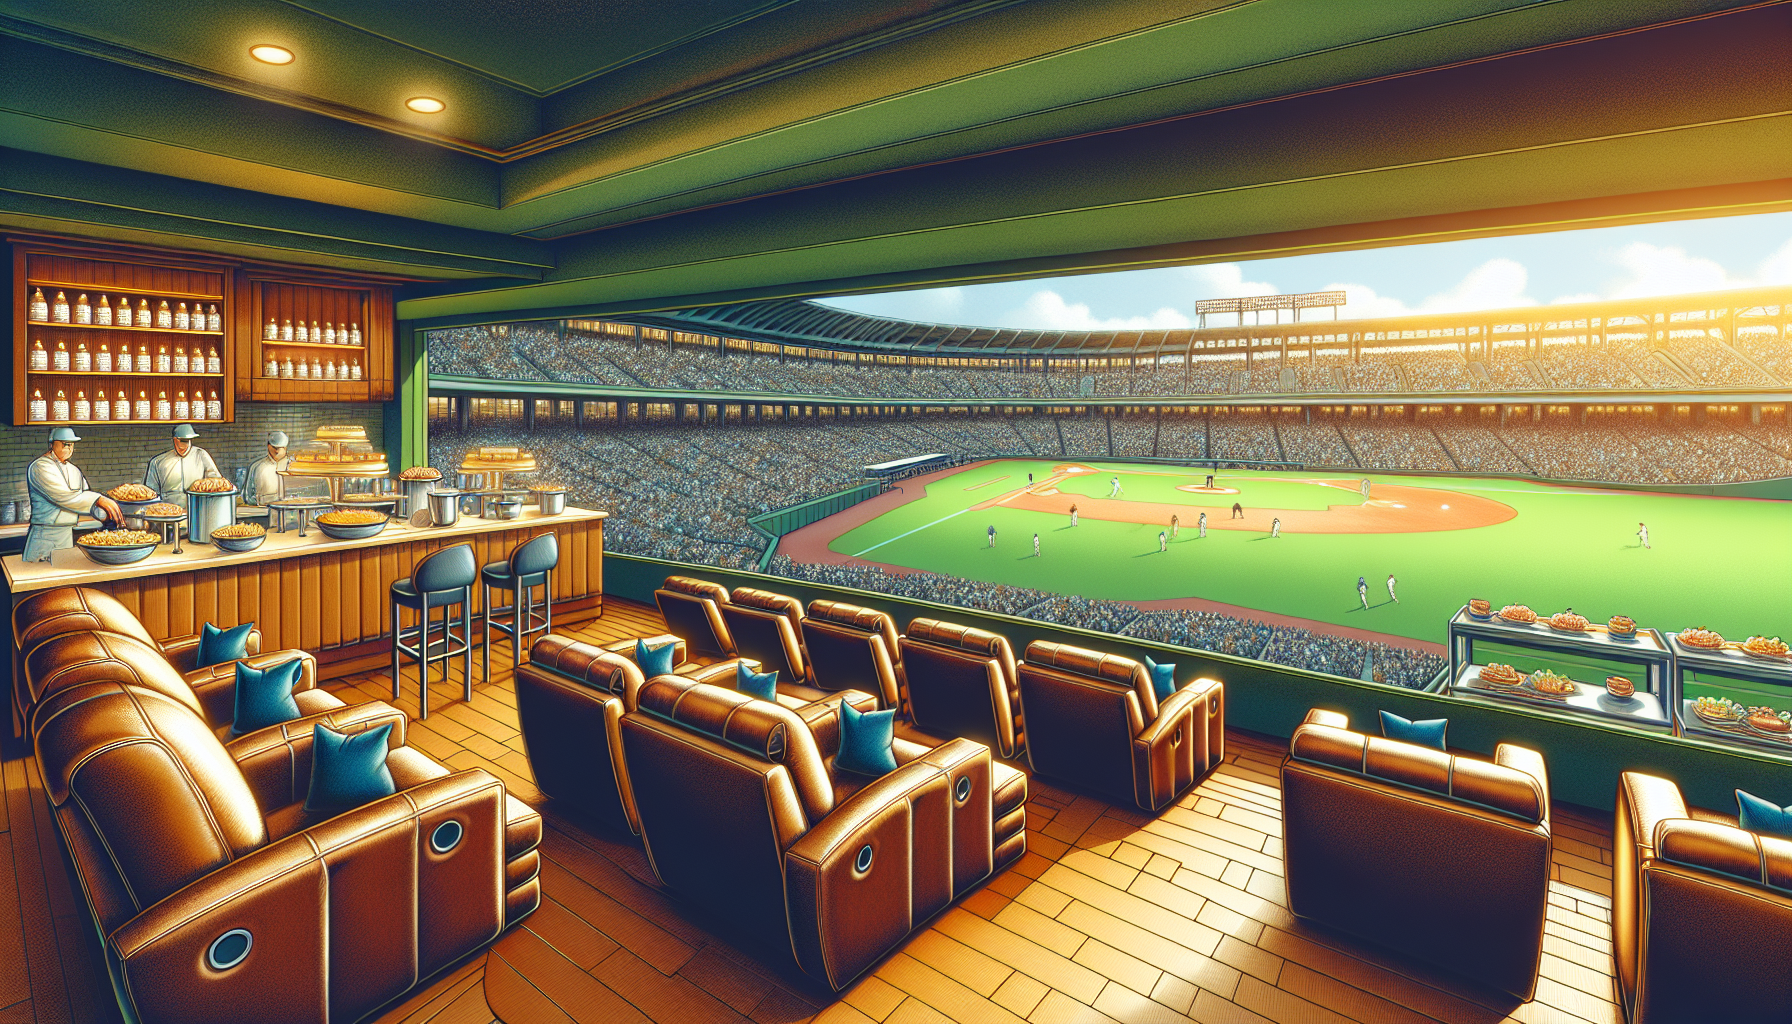 Illustration of a luxurious box seating area at a baseball stadium